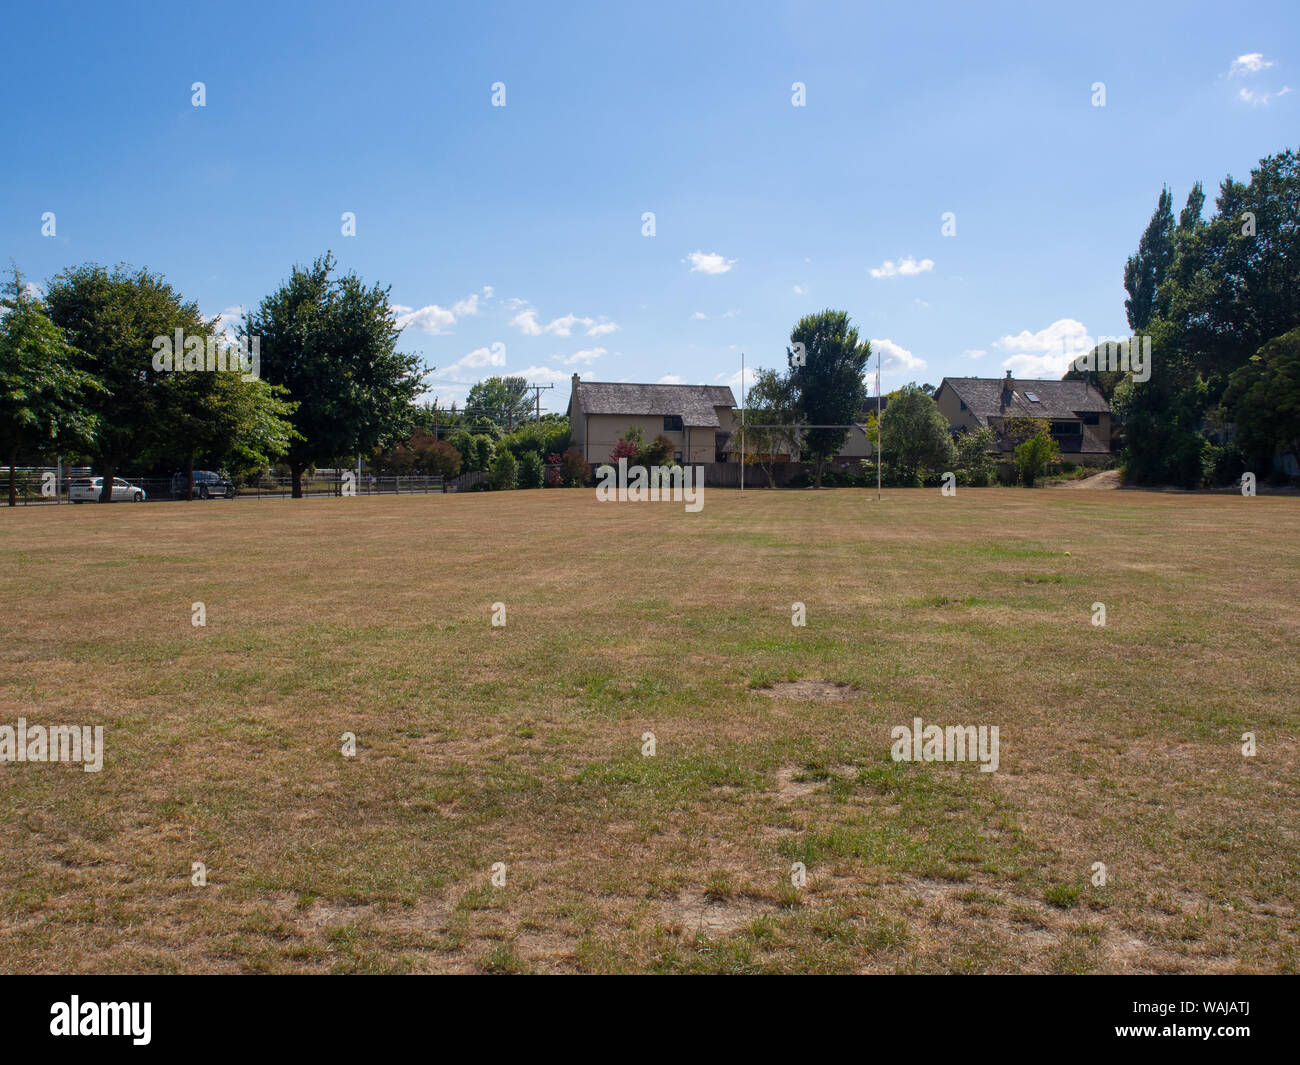 School Sports Field With Rugby Posts Stock Photo